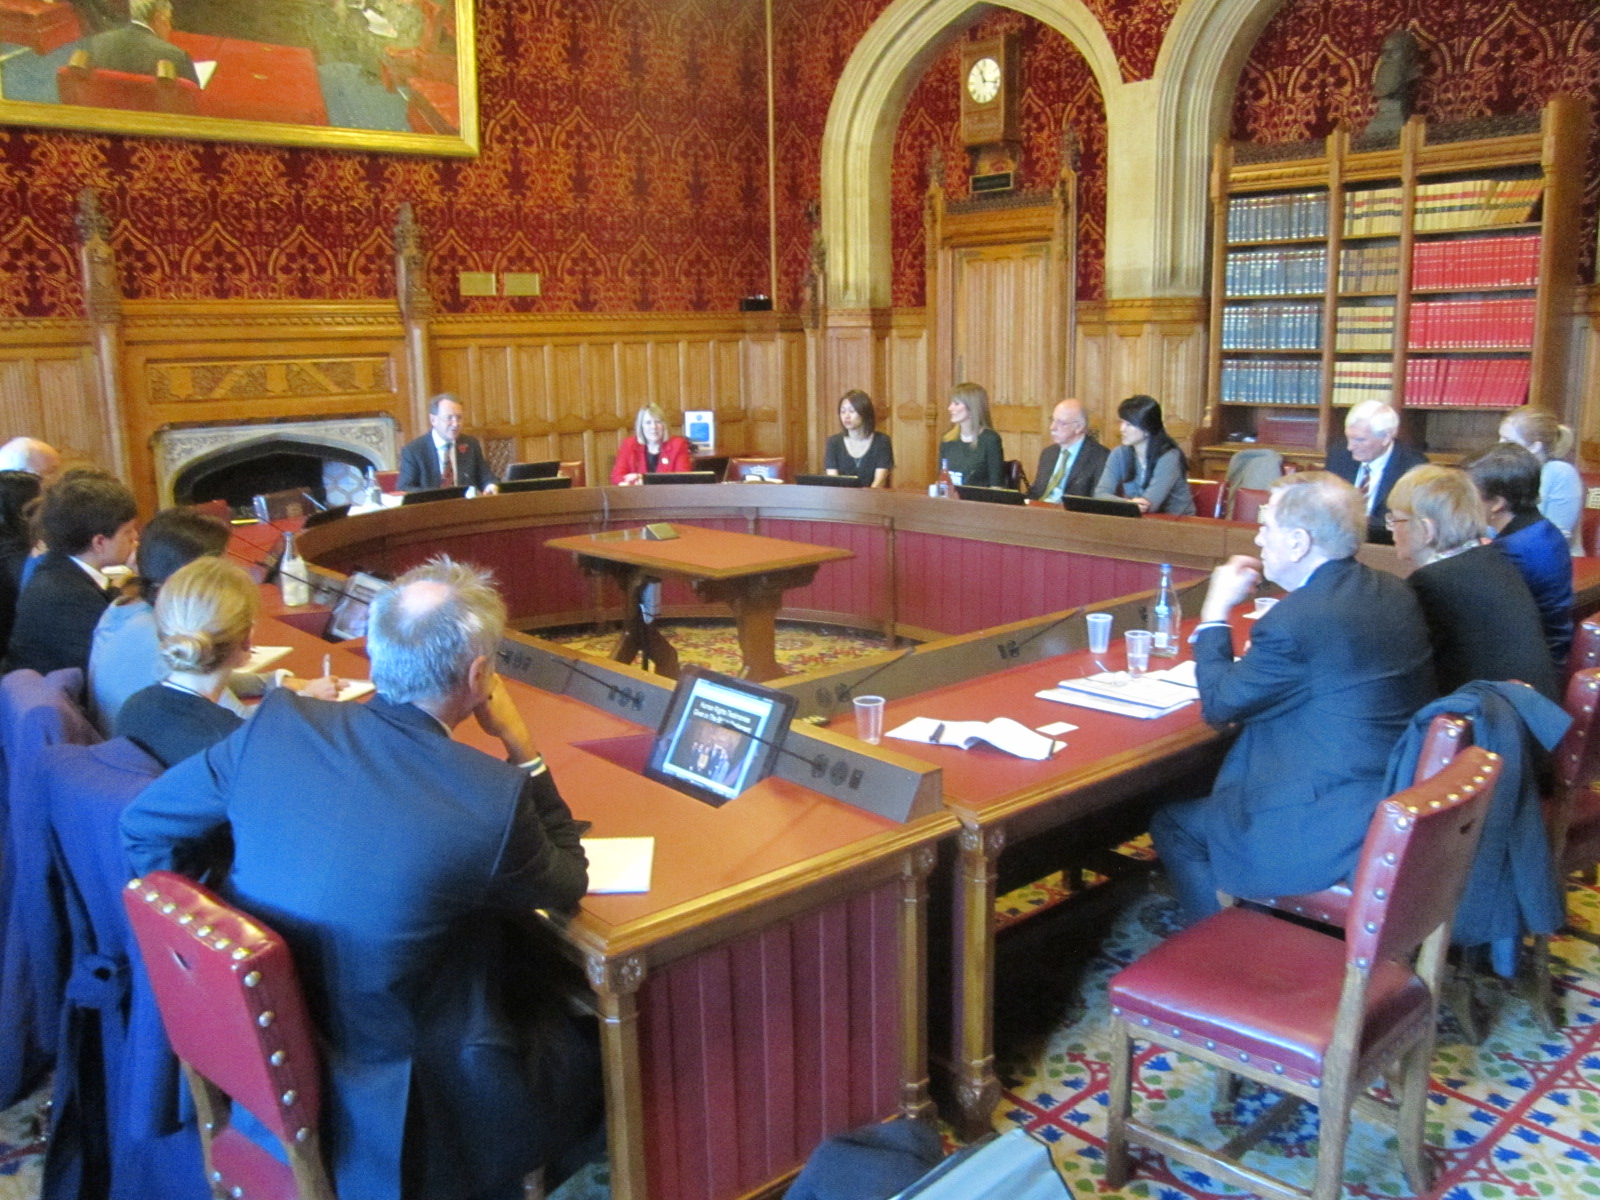 Meeting at the House of Lords with Mr.Justice Michael Kirby's Commission of Inquiry into Human Rights Abuses in North Korea.